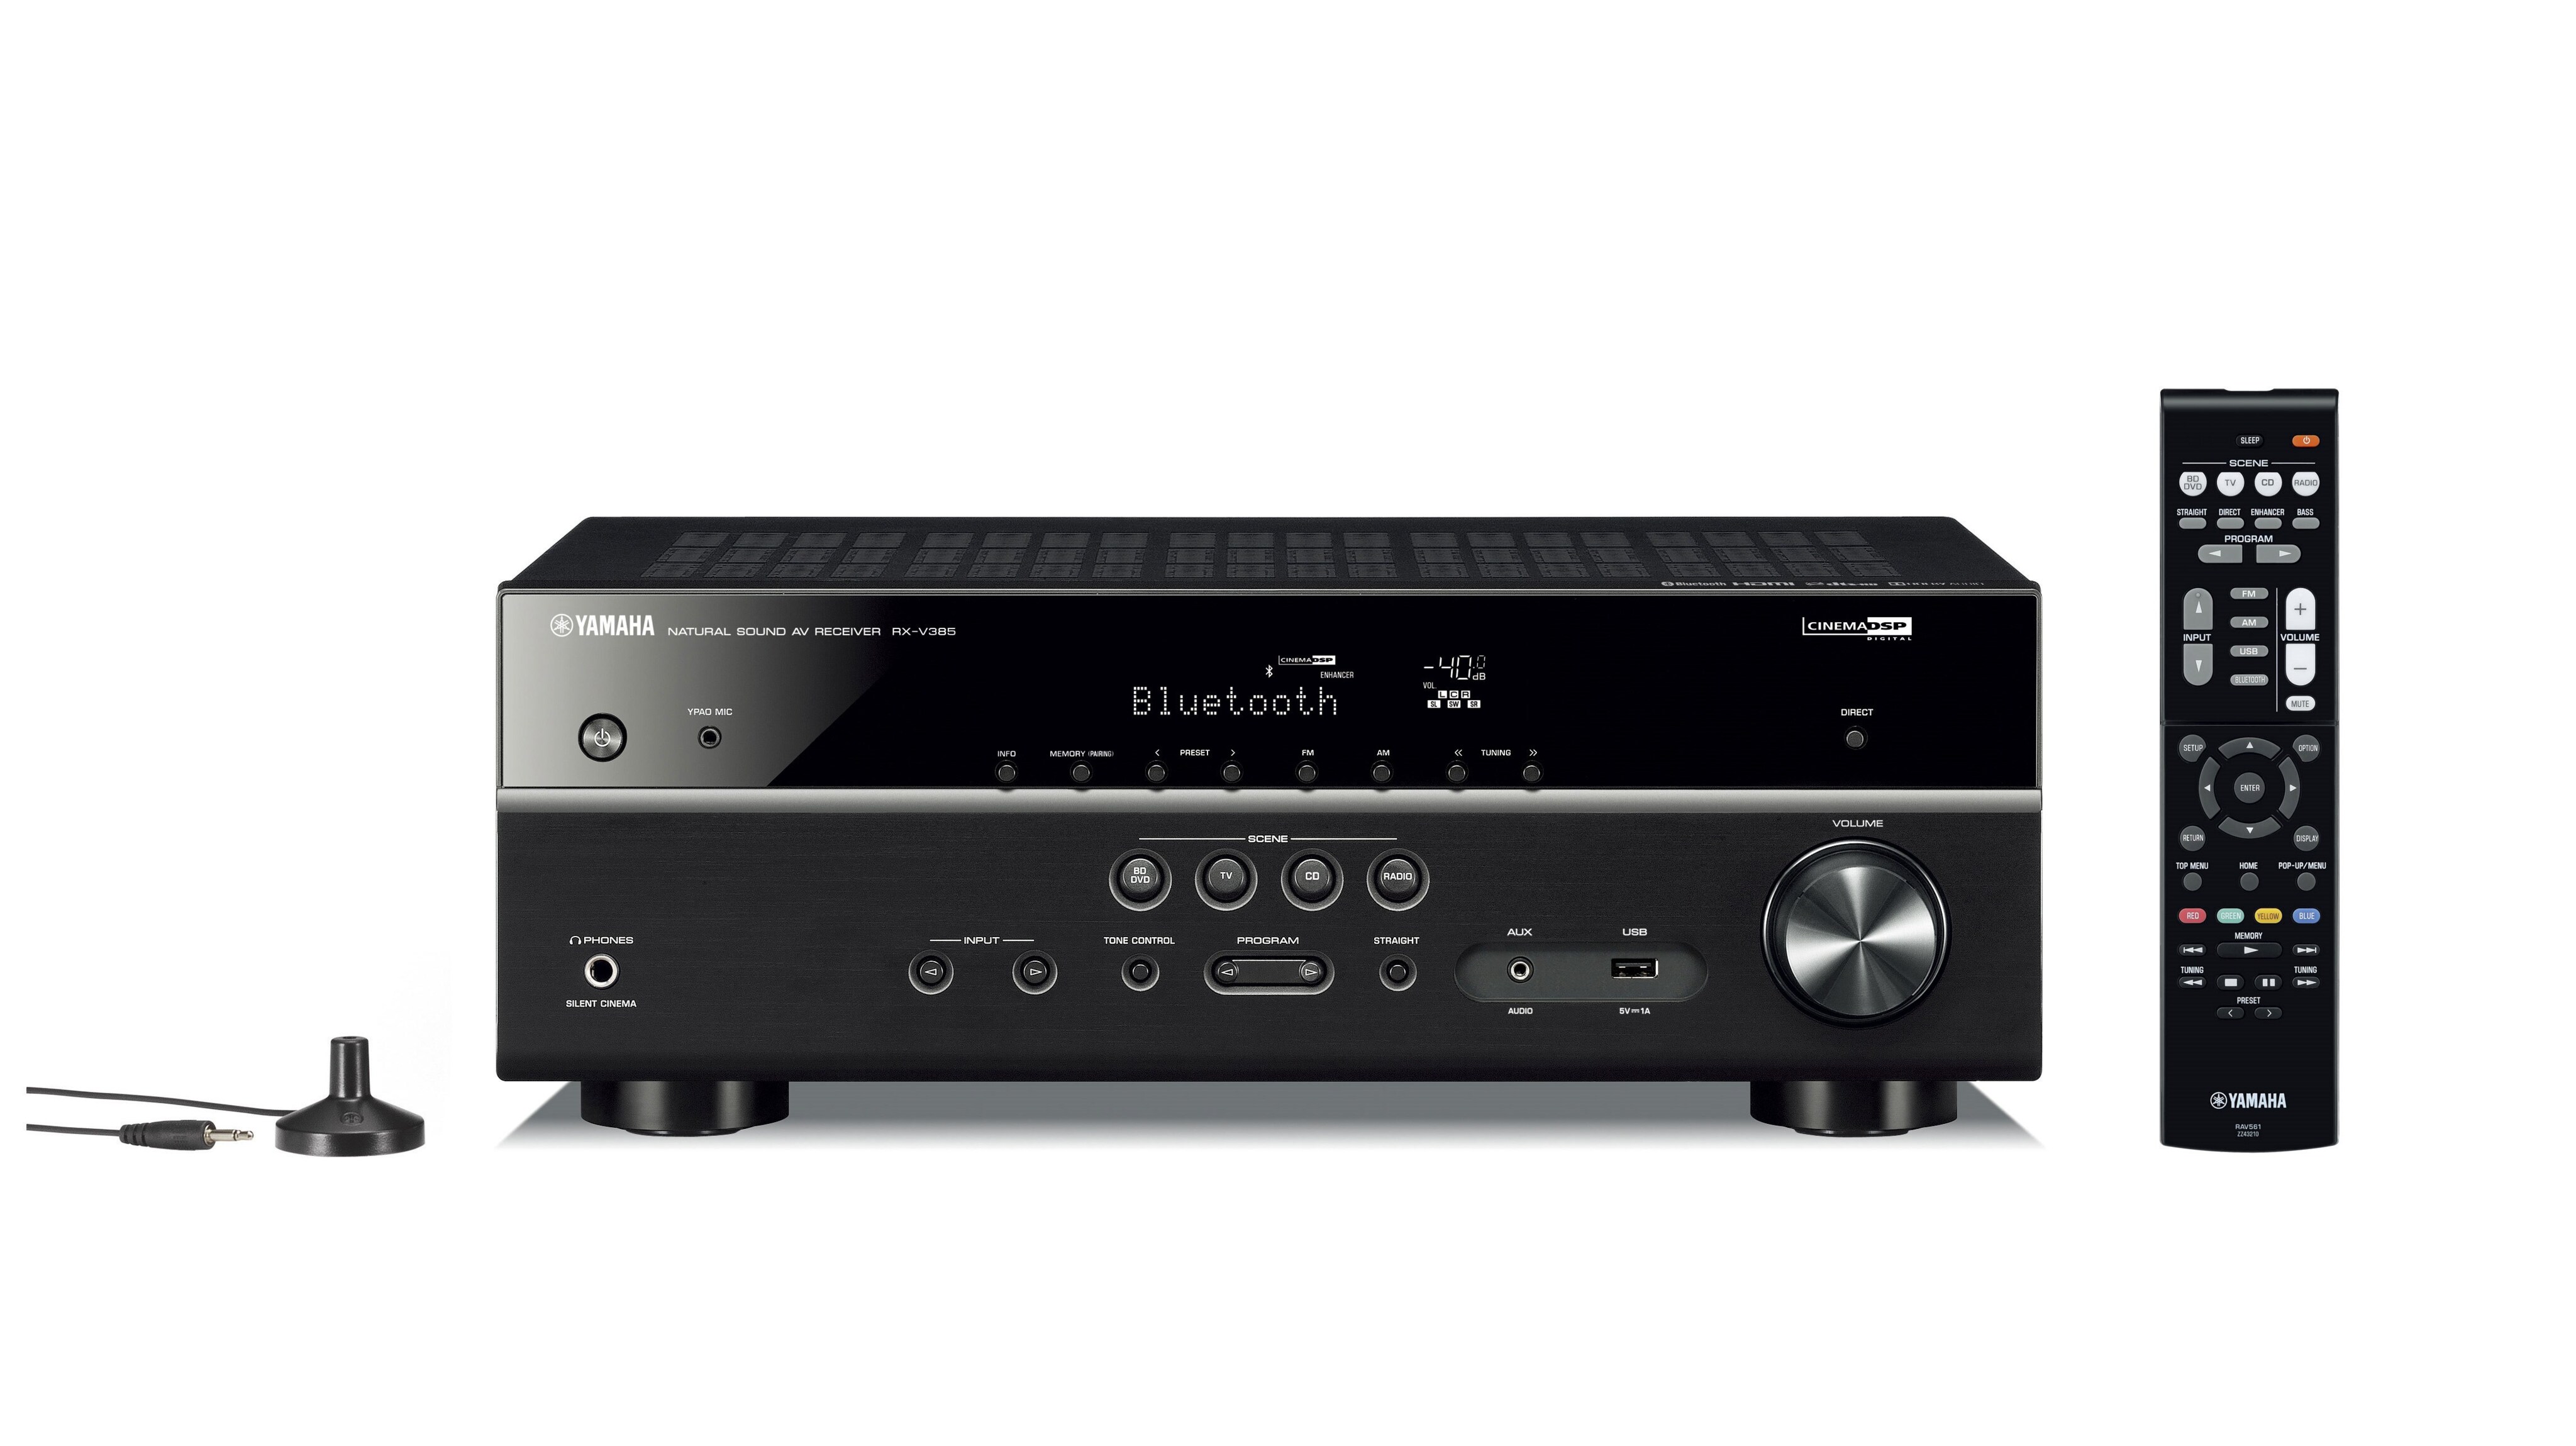 5.1 Home Theater Power Amplifier AV Receiver HDMI ARC HD Digital Optic  Coaxial Dolby/DTS Decode